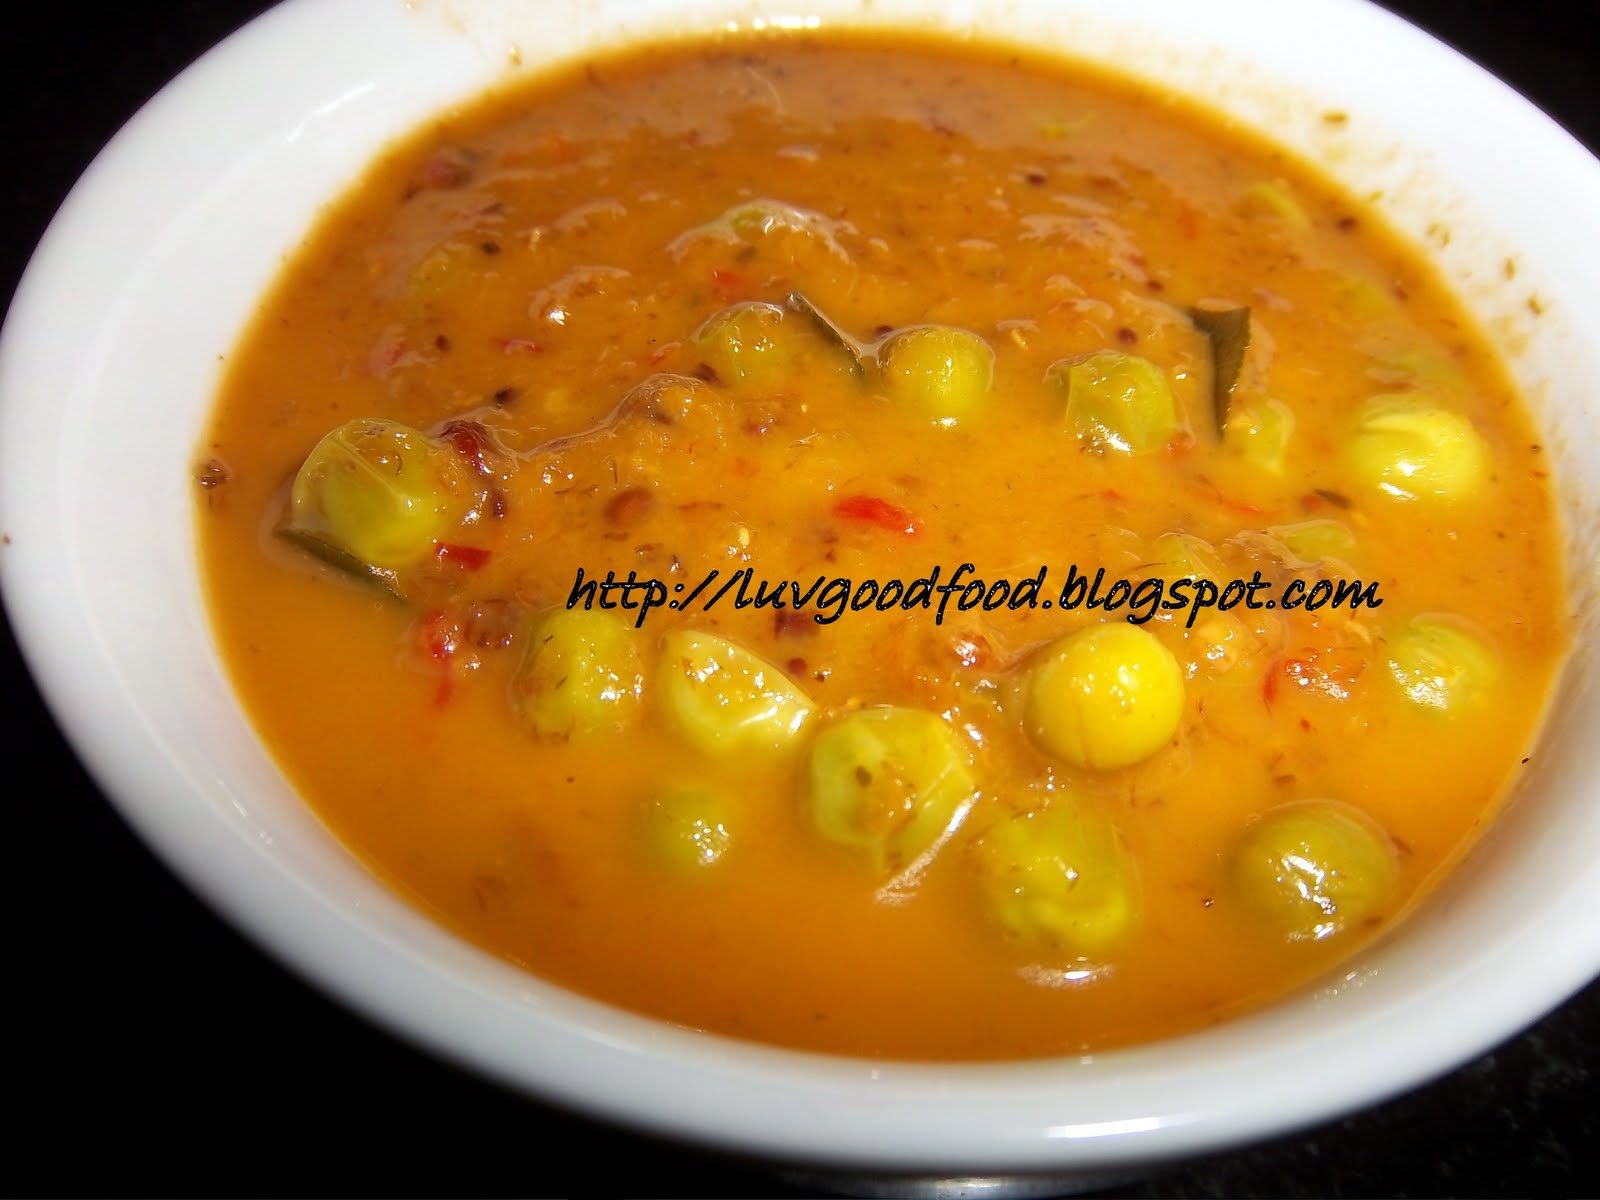 My experiments with food: Green peas curry